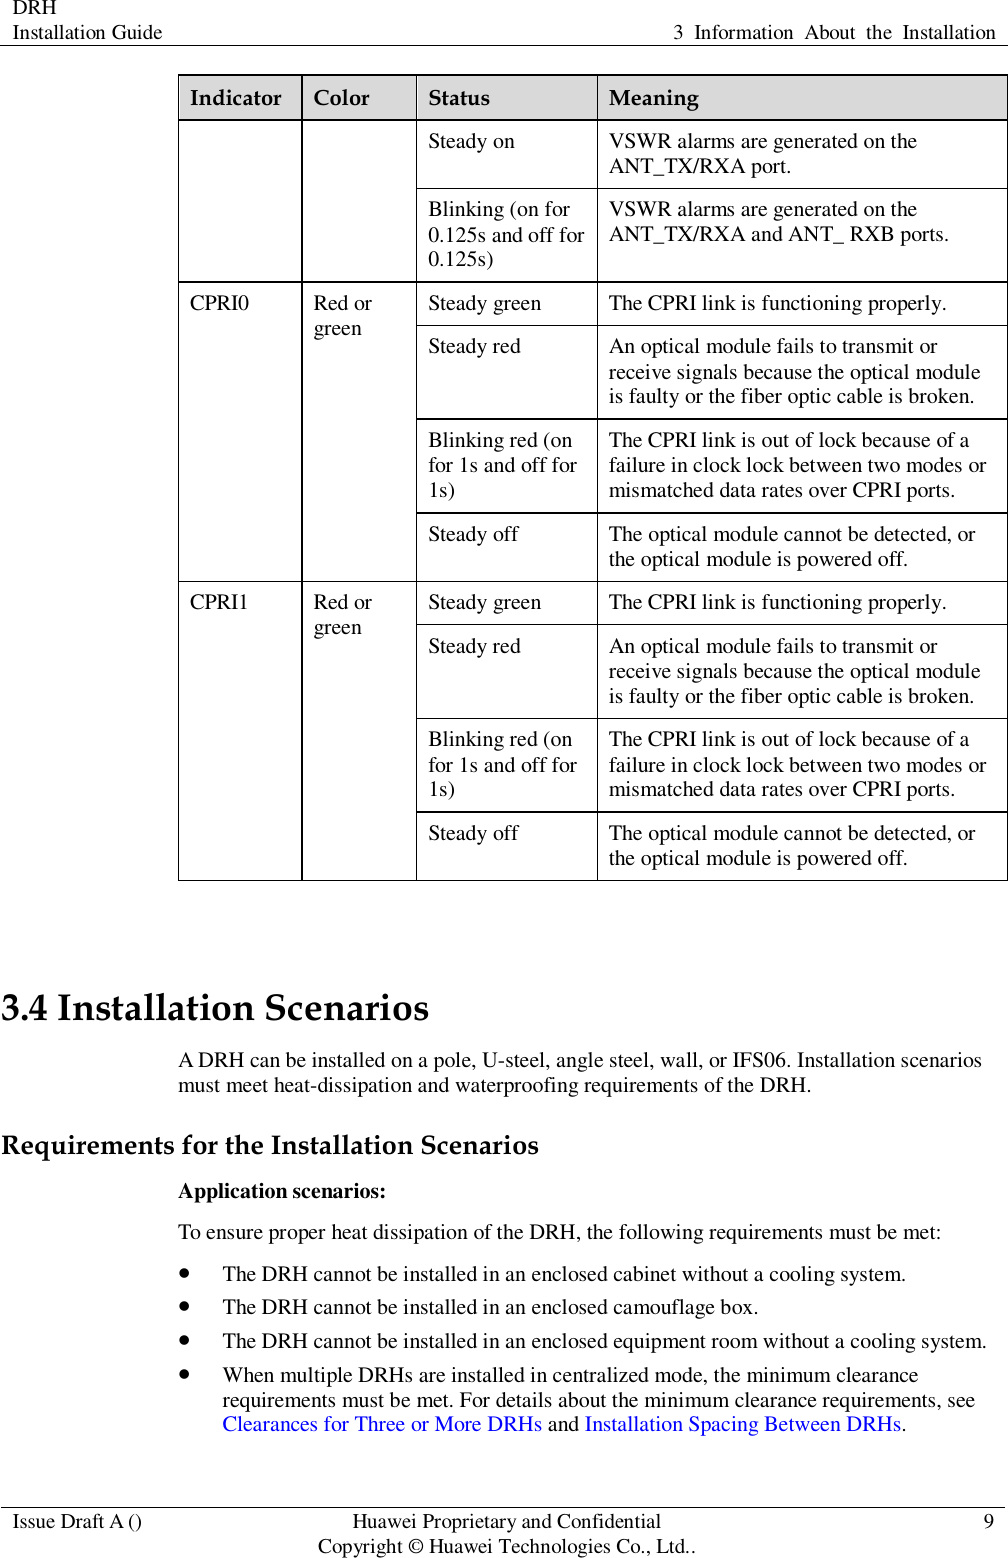 DRH   Installation Guide 3  Information  About  the  Installation  Issue Draft A () Huawei Proprietary and Confidential                                     Copyright © Huawei Technologies Co., Ltd.. 9  Indicator Color Status Meaning Steady on VSWR alarms are generated on the ANT_TX/RXA port. Blinking (on for 0.125s and off for 0.125s) VSWR alarms are generated on the ANT_TX/RXA and ANT_ RXB ports. CPRI0 Red or green Steady green The CPRI link is functioning properly. Steady red An optical module fails to transmit or receive signals because the optical module is faulty or the fiber optic cable is broken. Blinking red (on for 1s and off for 1s) The CPRI link is out of lock because of a failure in clock lock between two modes or mismatched data rates over CPRI ports. Steady off The optical module cannot be detected, or the optical module is powered off. CPRI1 Red or green Steady green The CPRI link is functioning properly. Steady red An optical module fails to transmit or receive signals because the optical module is faulty or the fiber optic cable is broken. Blinking red (on for 1s and off for 1s) The CPRI link is out of lock because of a failure in clock lock between two modes or mismatched data rates over CPRI ports. Steady off The optical module cannot be detected, or the optical module is powered off.  3.4 Installation Scenarios A DRH can be installed on a pole, U-steel, angle steel, wall, or IFS06. Installation scenarios must meet heat-dissipation and waterproofing requirements of the DRH. Requirements for the Installation Scenarios Application scenarios: To ensure proper heat dissipation of the DRH, the following requirements must be met:  The DRH cannot be installed in an enclosed cabinet without a cooling system.  The DRH cannot be installed in an enclosed camouflage box.  The DRH cannot be installed in an enclosed equipment room without a cooling system.  When multiple DRHs are installed in centralized mode, the minimum clearance requirements must be met. For details about the minimum clearance requirements, see Clearances for Three or More DRHs and Installation Spacing Between DRHs. 